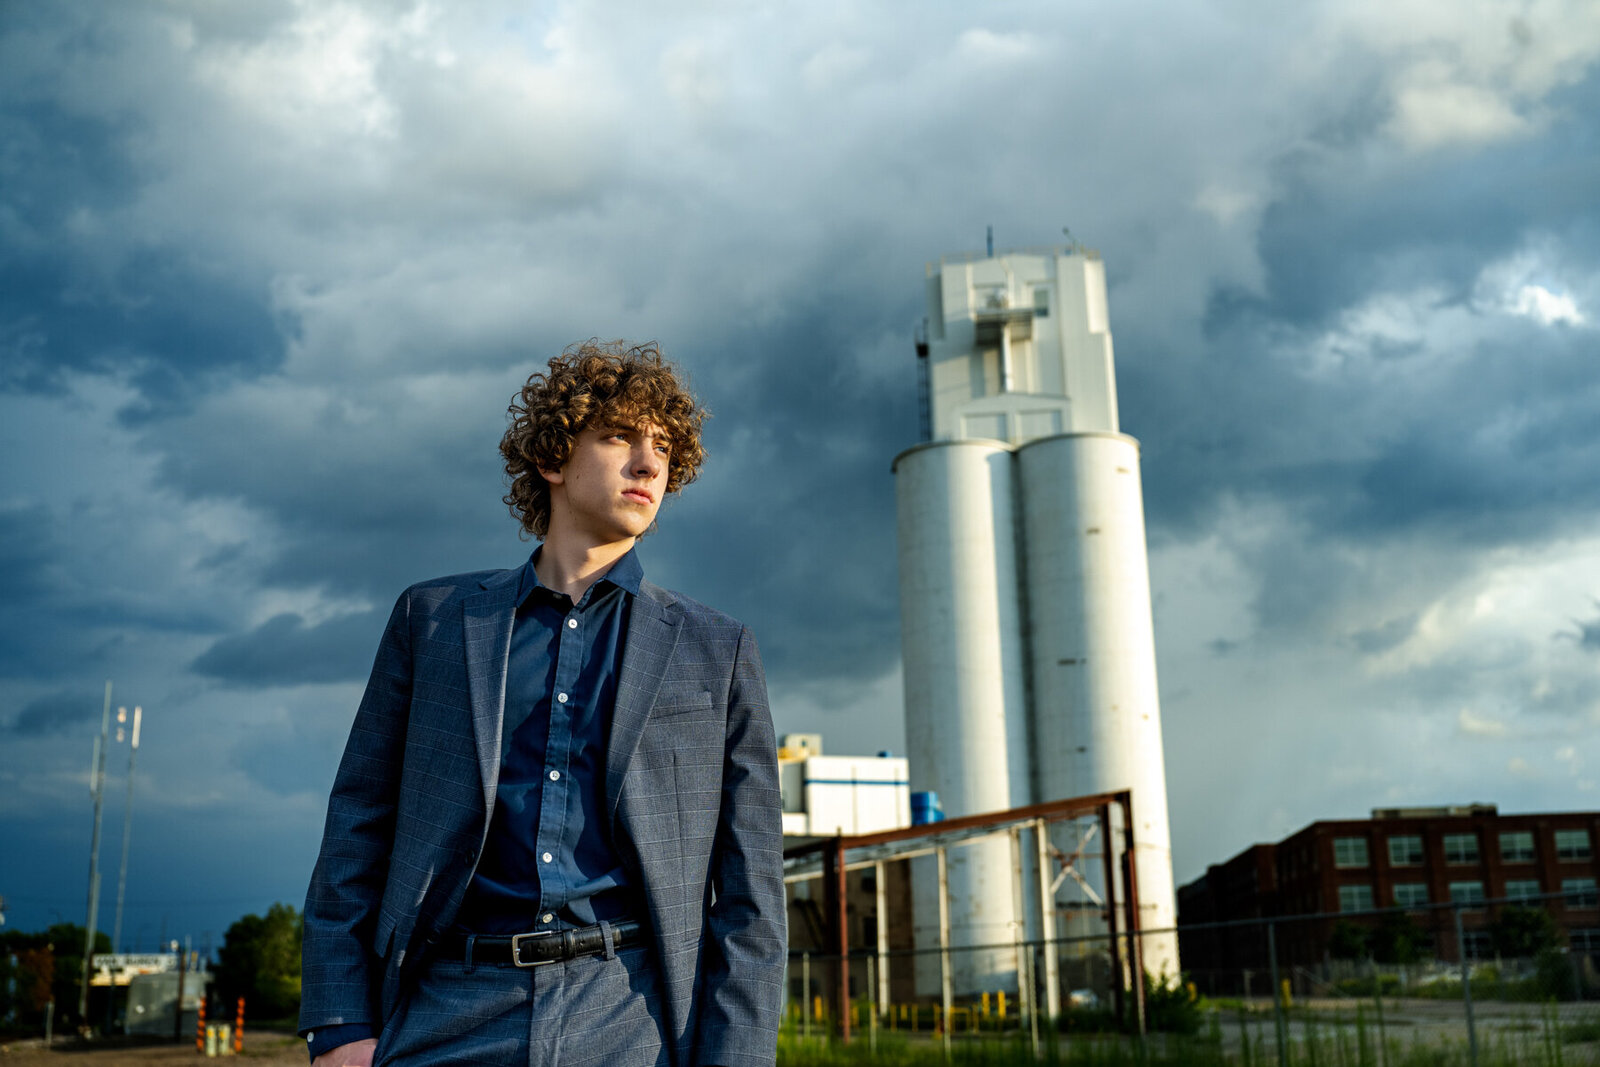 Edina Minnesota high school grad picture of boy in city with dramatic skies